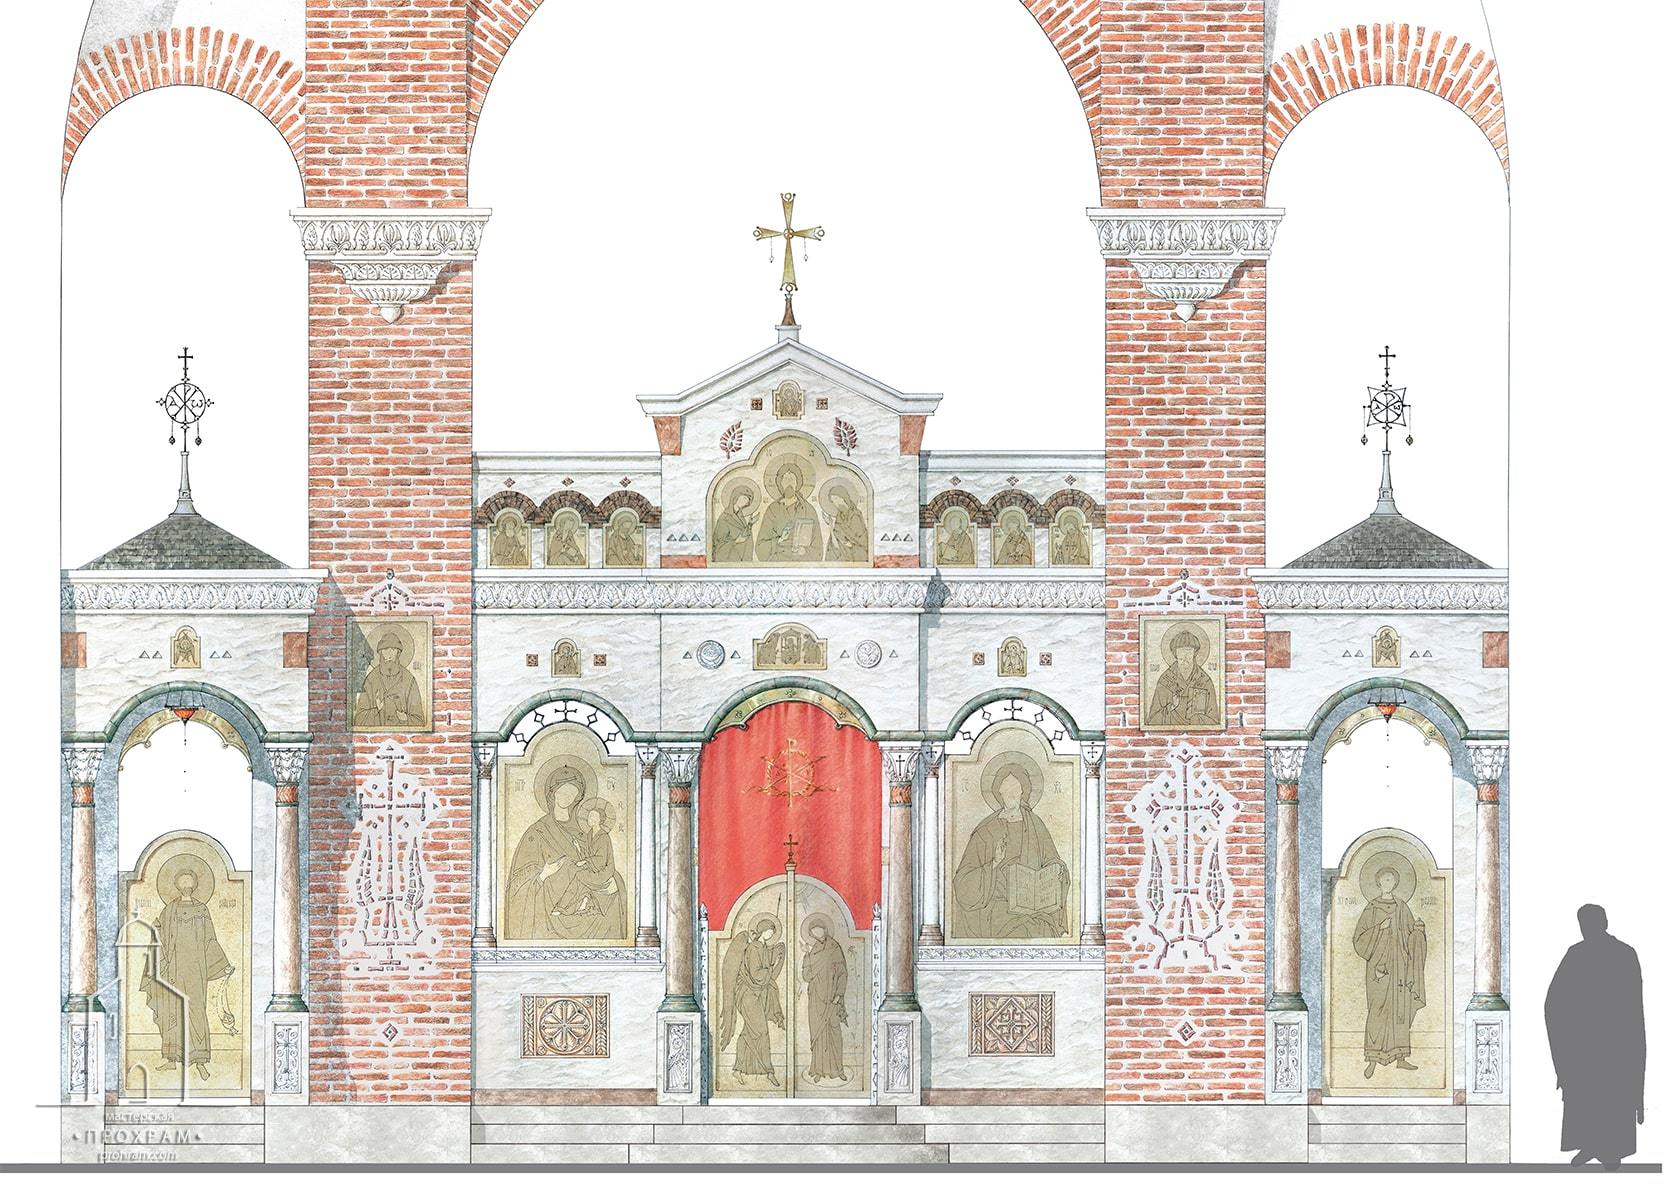 iconostasis project, orthodox architecture, sacred architecture,sketch design- the project of the altar barrier; - design of the Holy Table with the ciborium; - the design of the Oblation Table; - the design of the synthrone with the bishop's seat; - the design of the washbasin